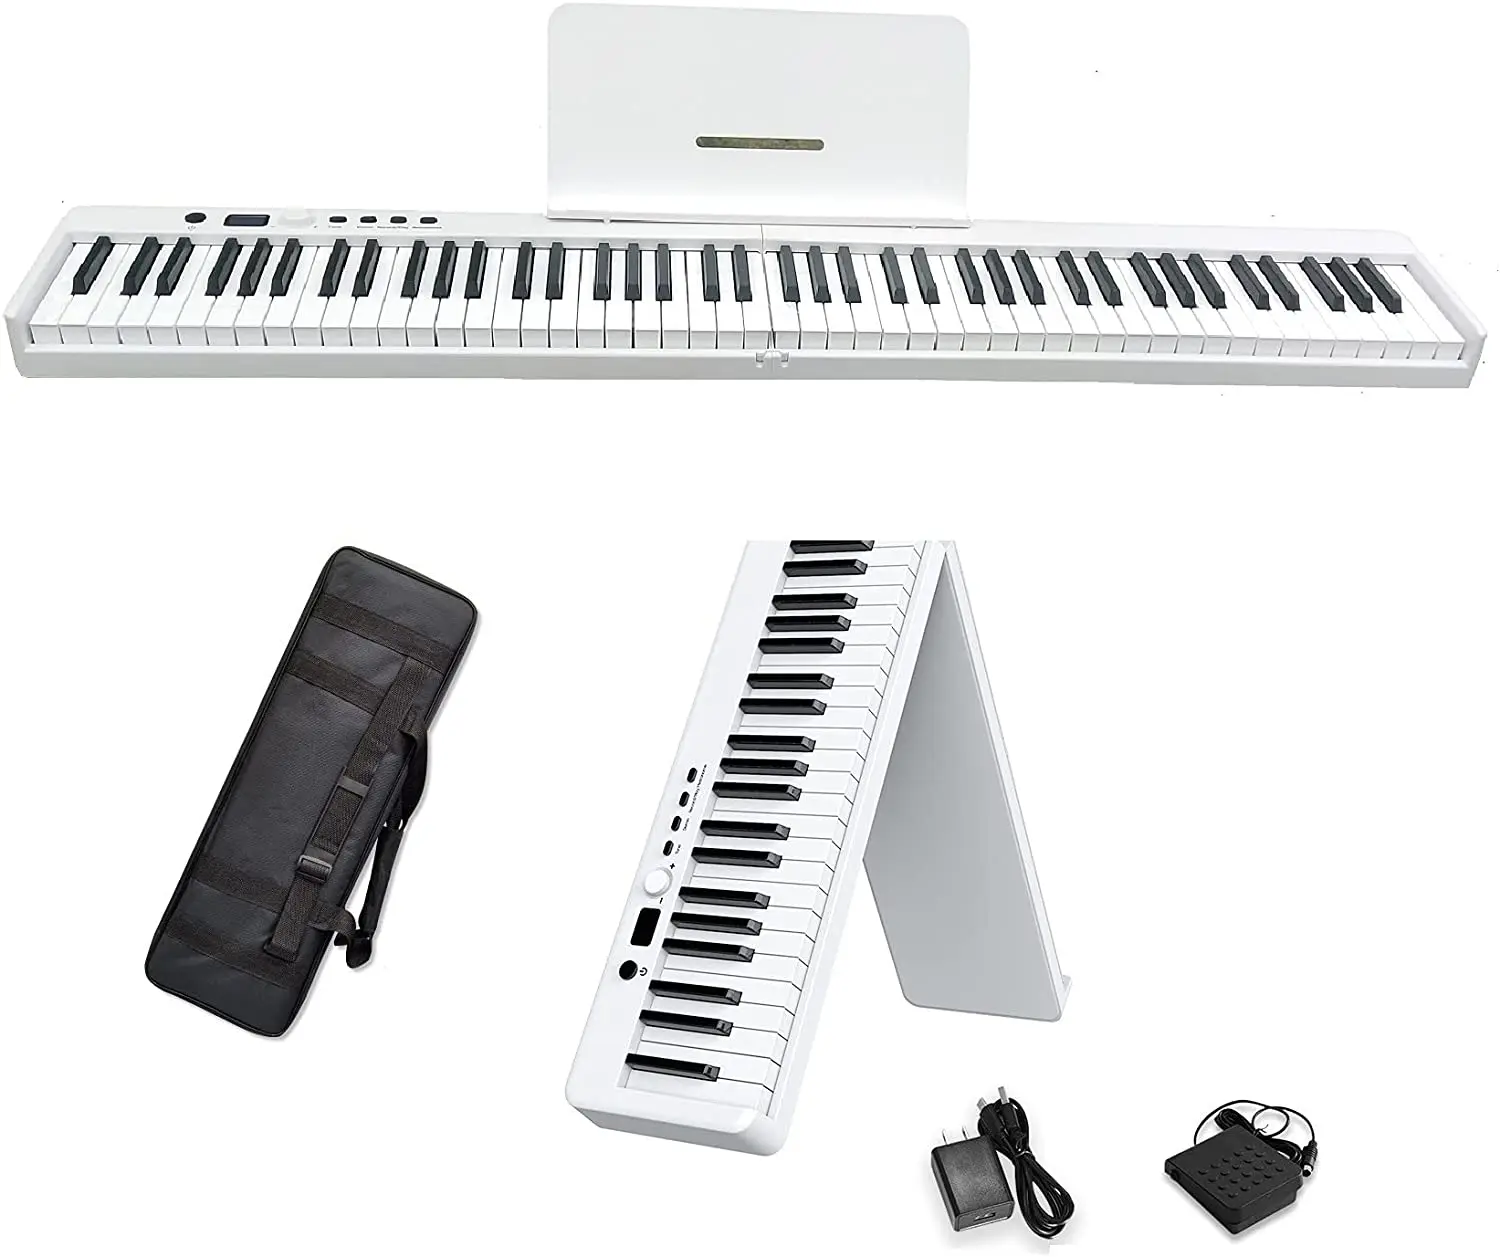 Portable 88 Key Full Size Touch Sensitive Electric Keyboard Piano with Lighted Keys Wireless Connection Sustain Pedal and Handbag Black Vangoa Folding Piano Keyboard 